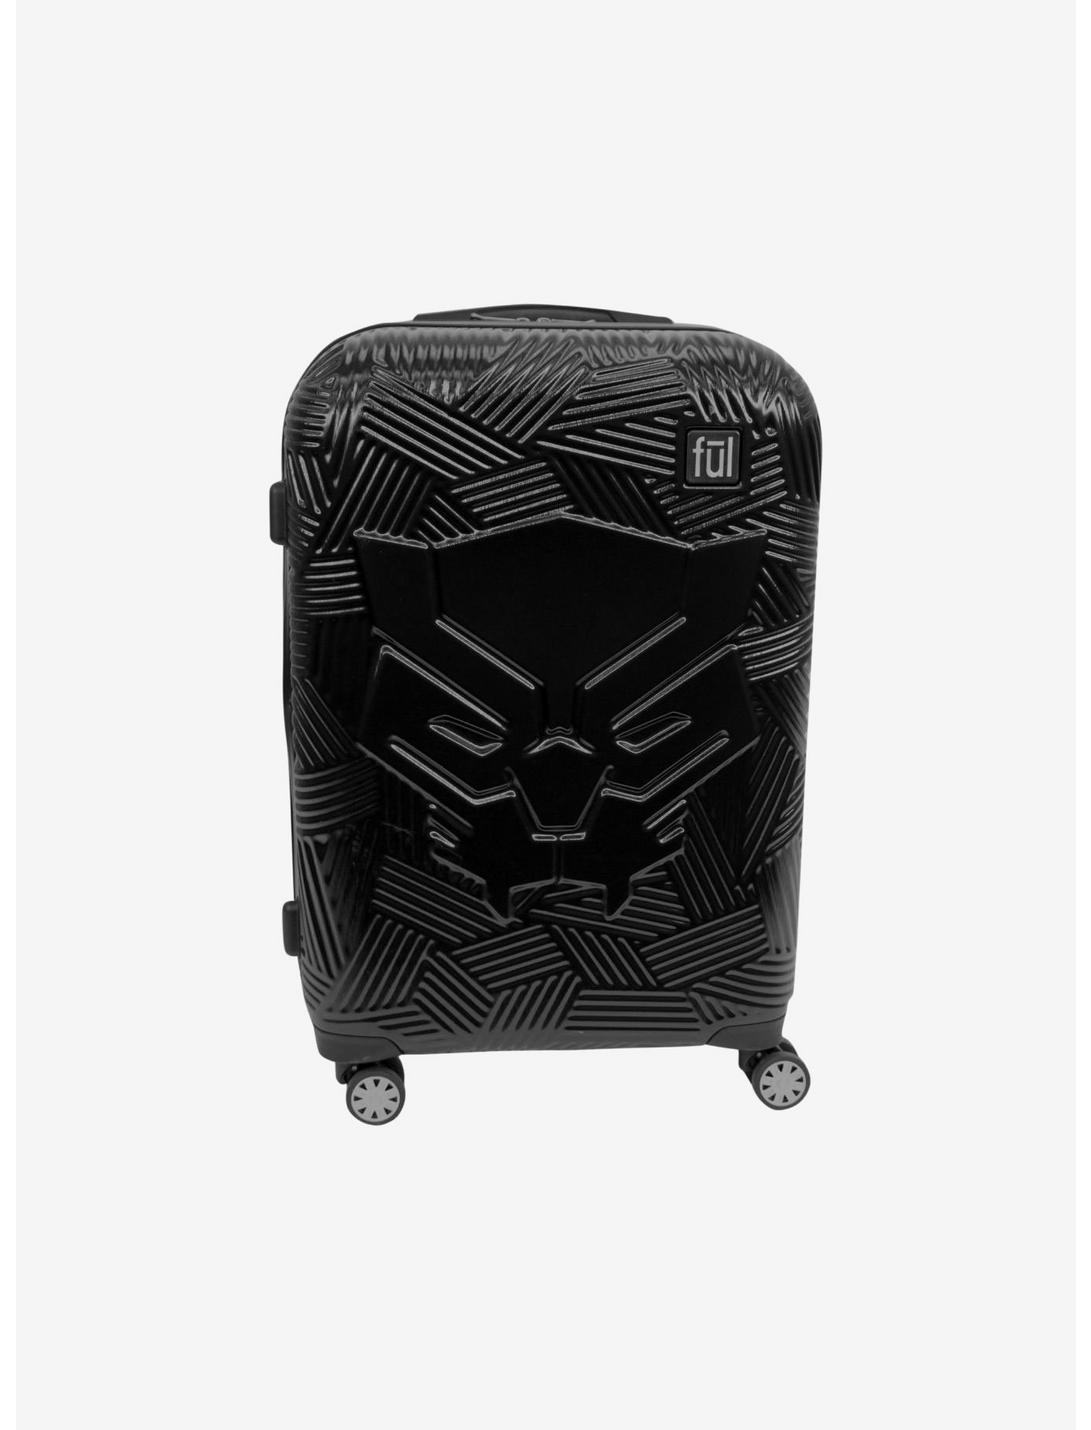 FUL Marvel Black Panther Icon Molded Hard Sided 25 Inch Rolling Luggage, , hi-res